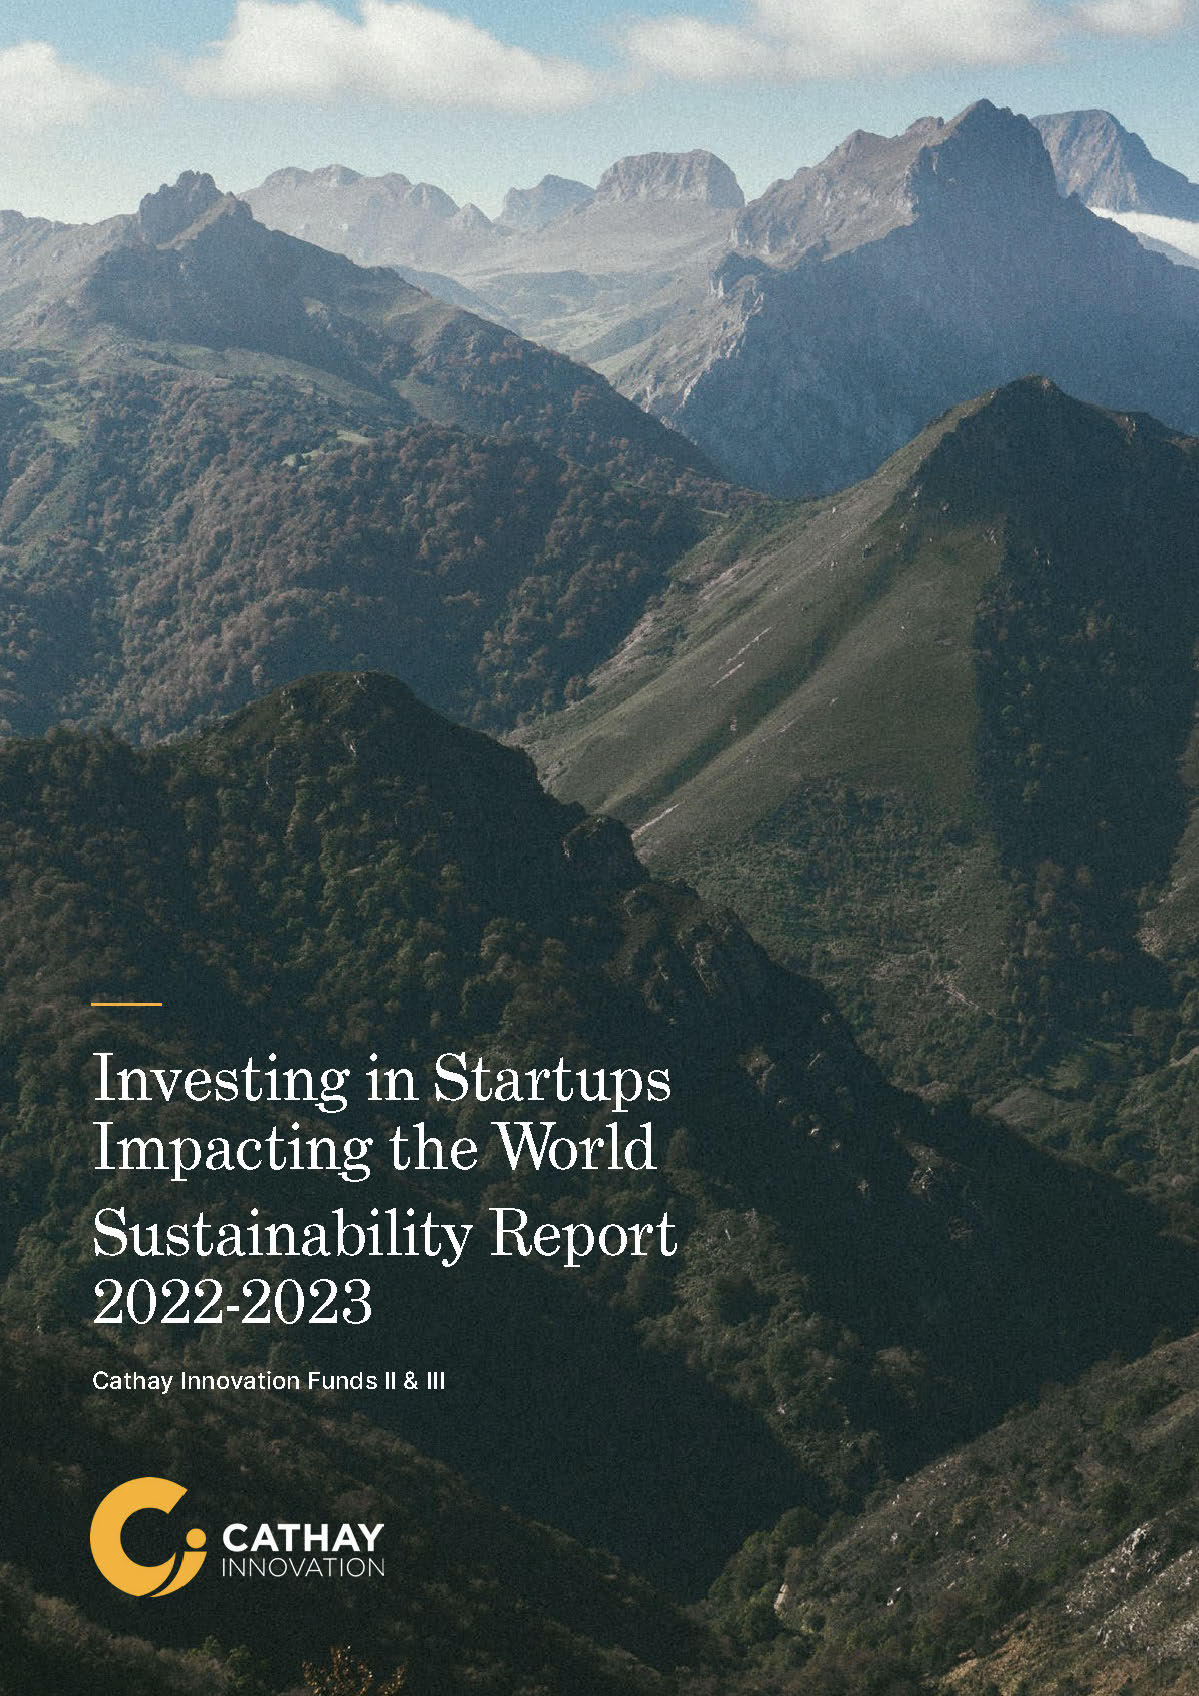 Cathay Innovation_Sustainability 2022-2023_Fund_II_Page_01